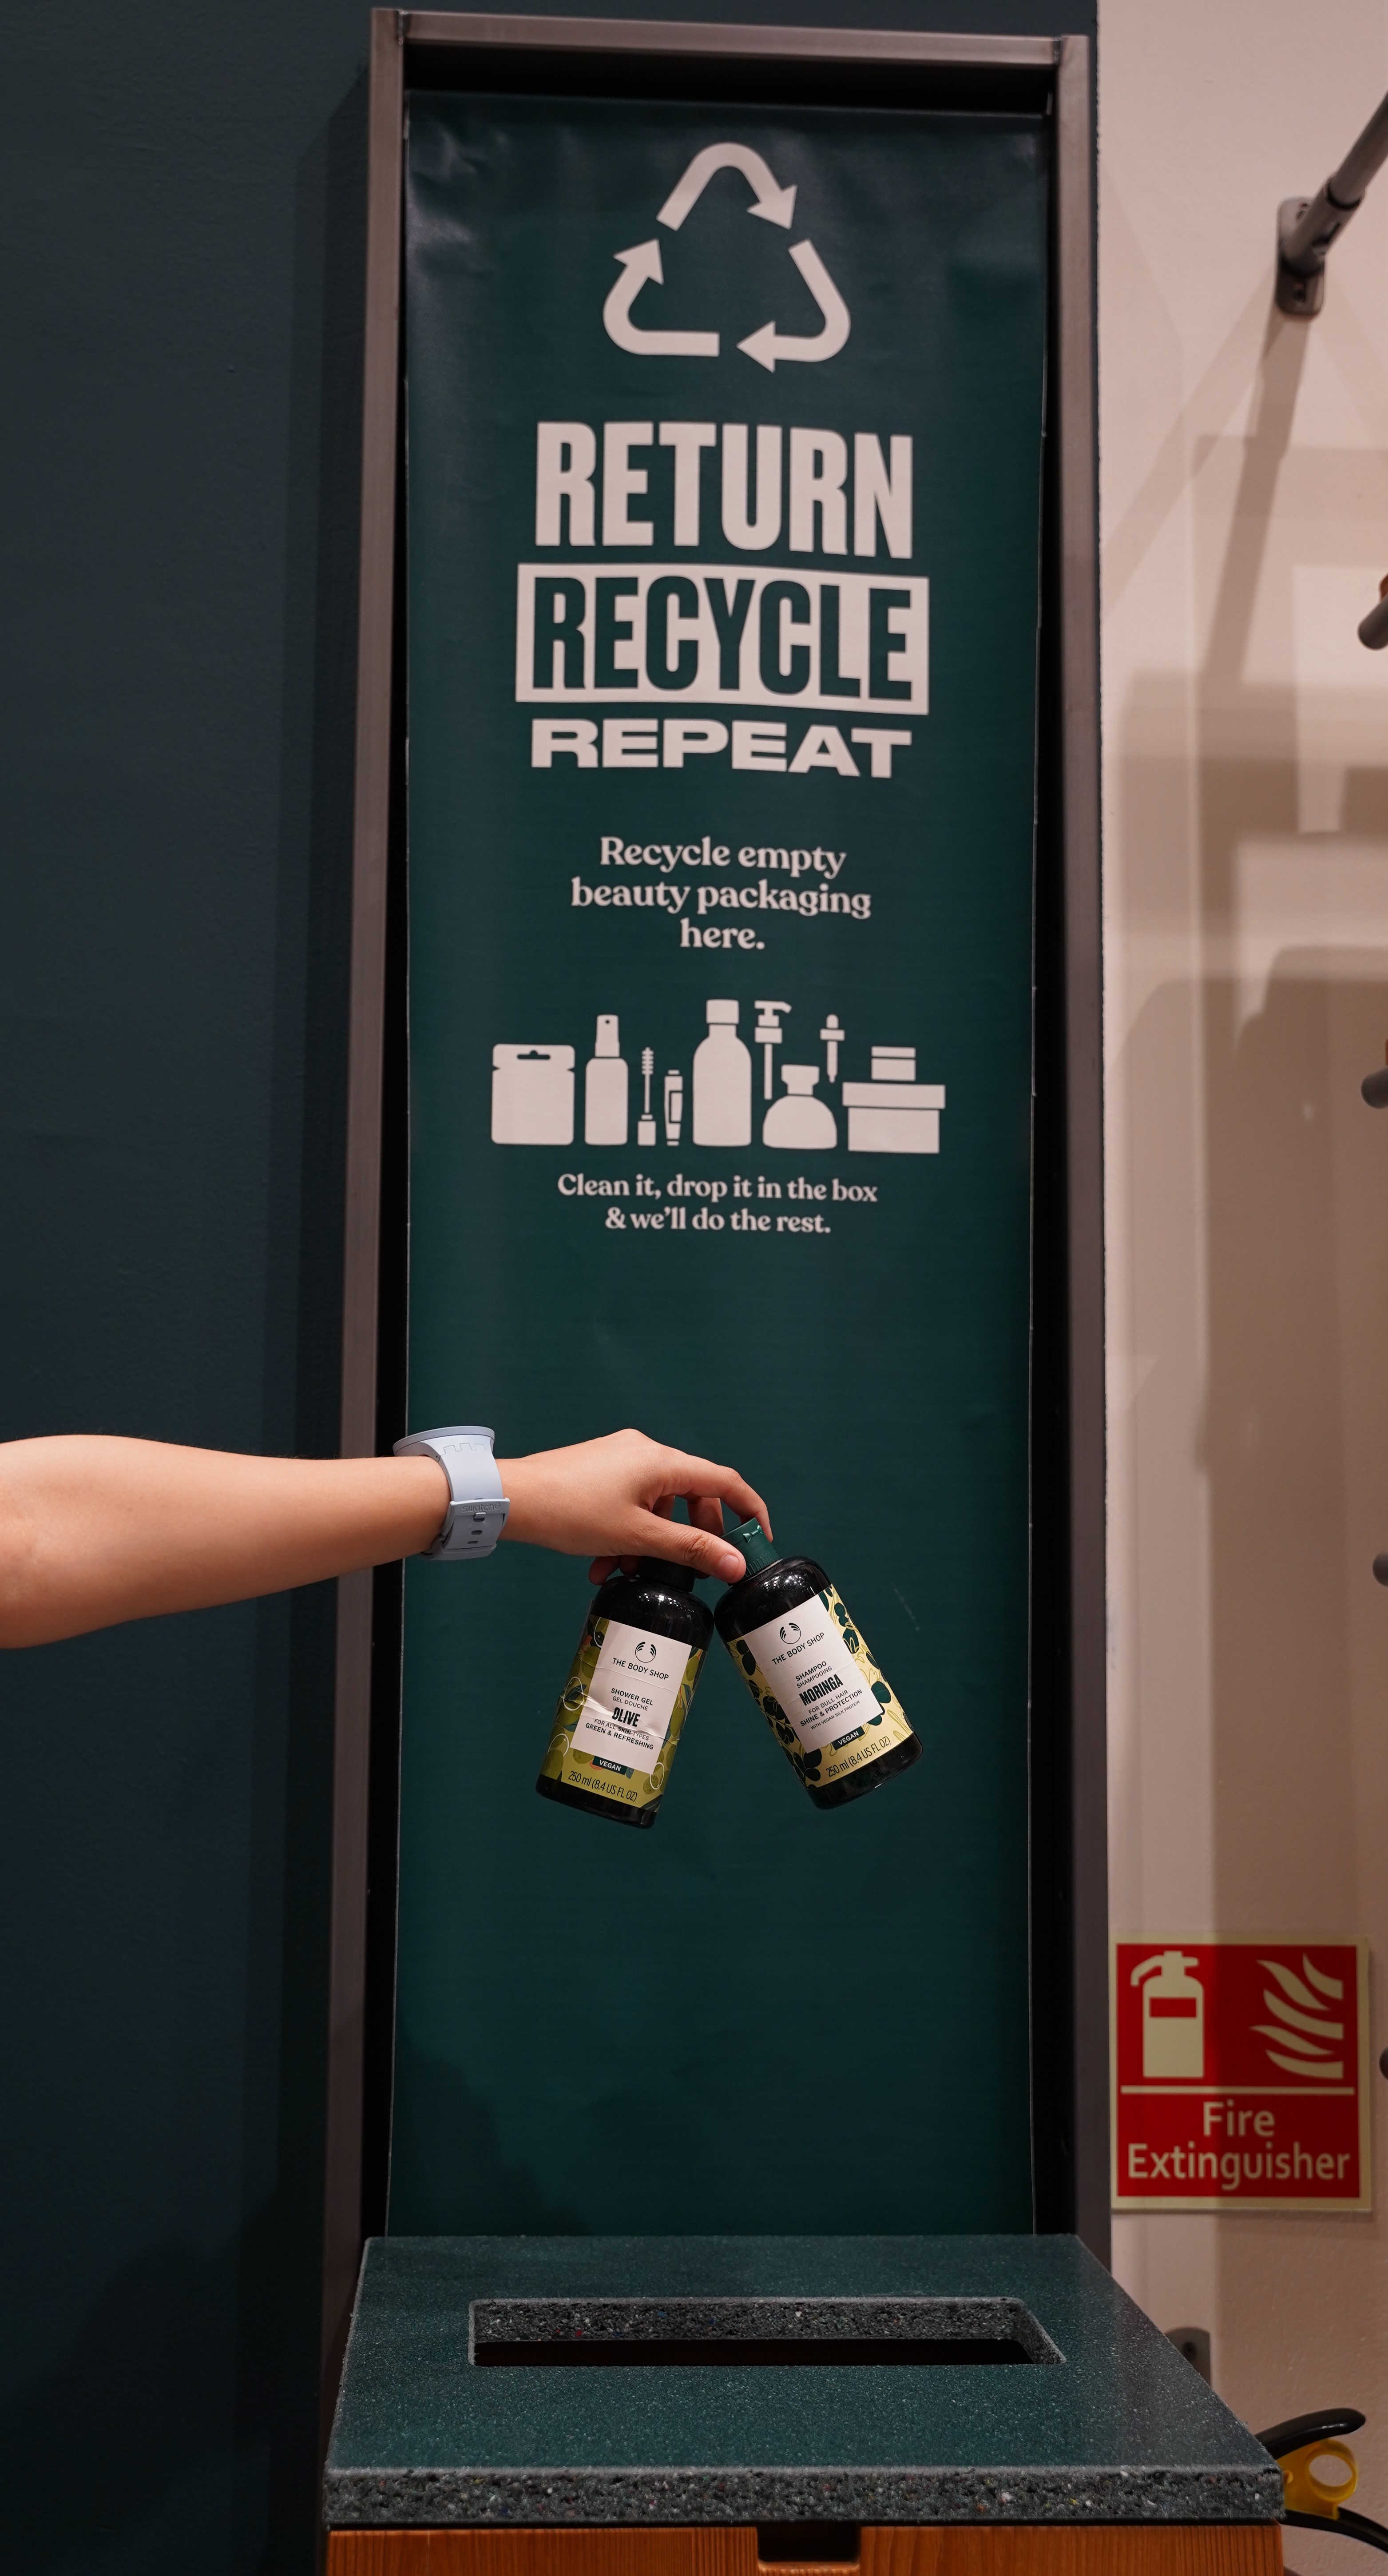 Return, Recycle, Repeat at The Body Shop Activist Workshop stores